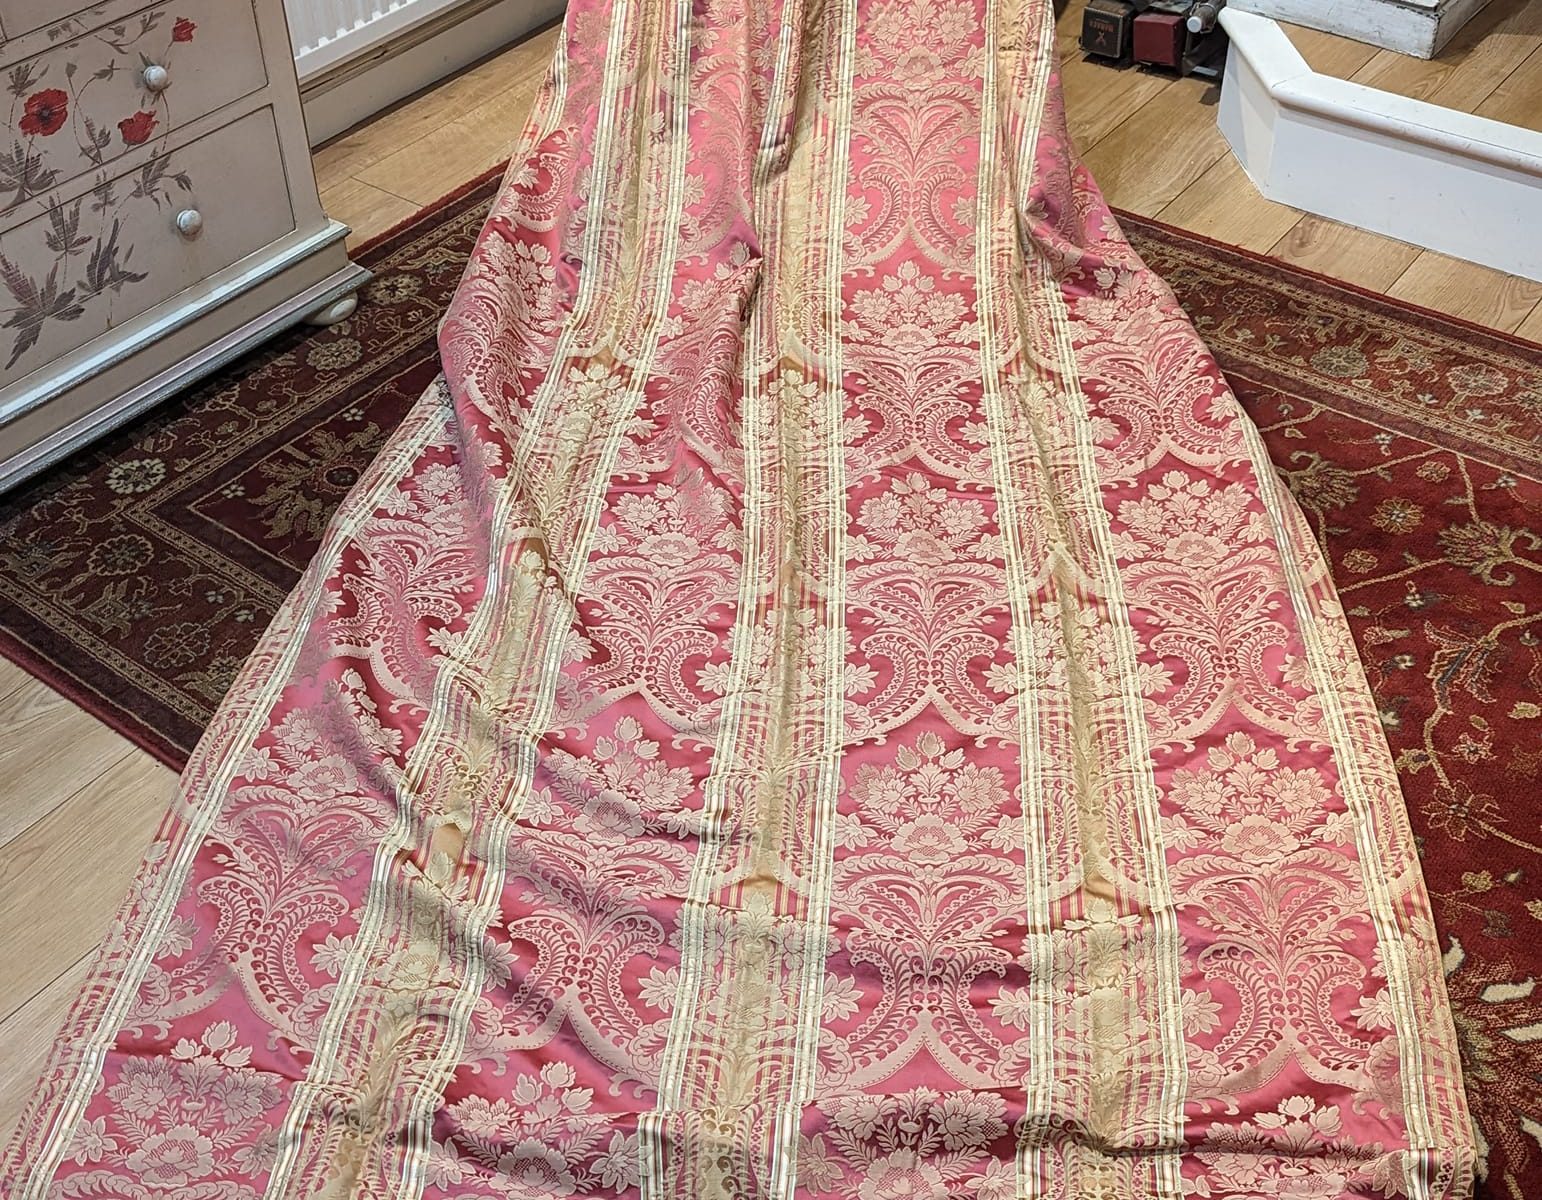 Beautiful Very Long Double-Sided Silk Damask Second-Hand Curtain in Pink & Gold